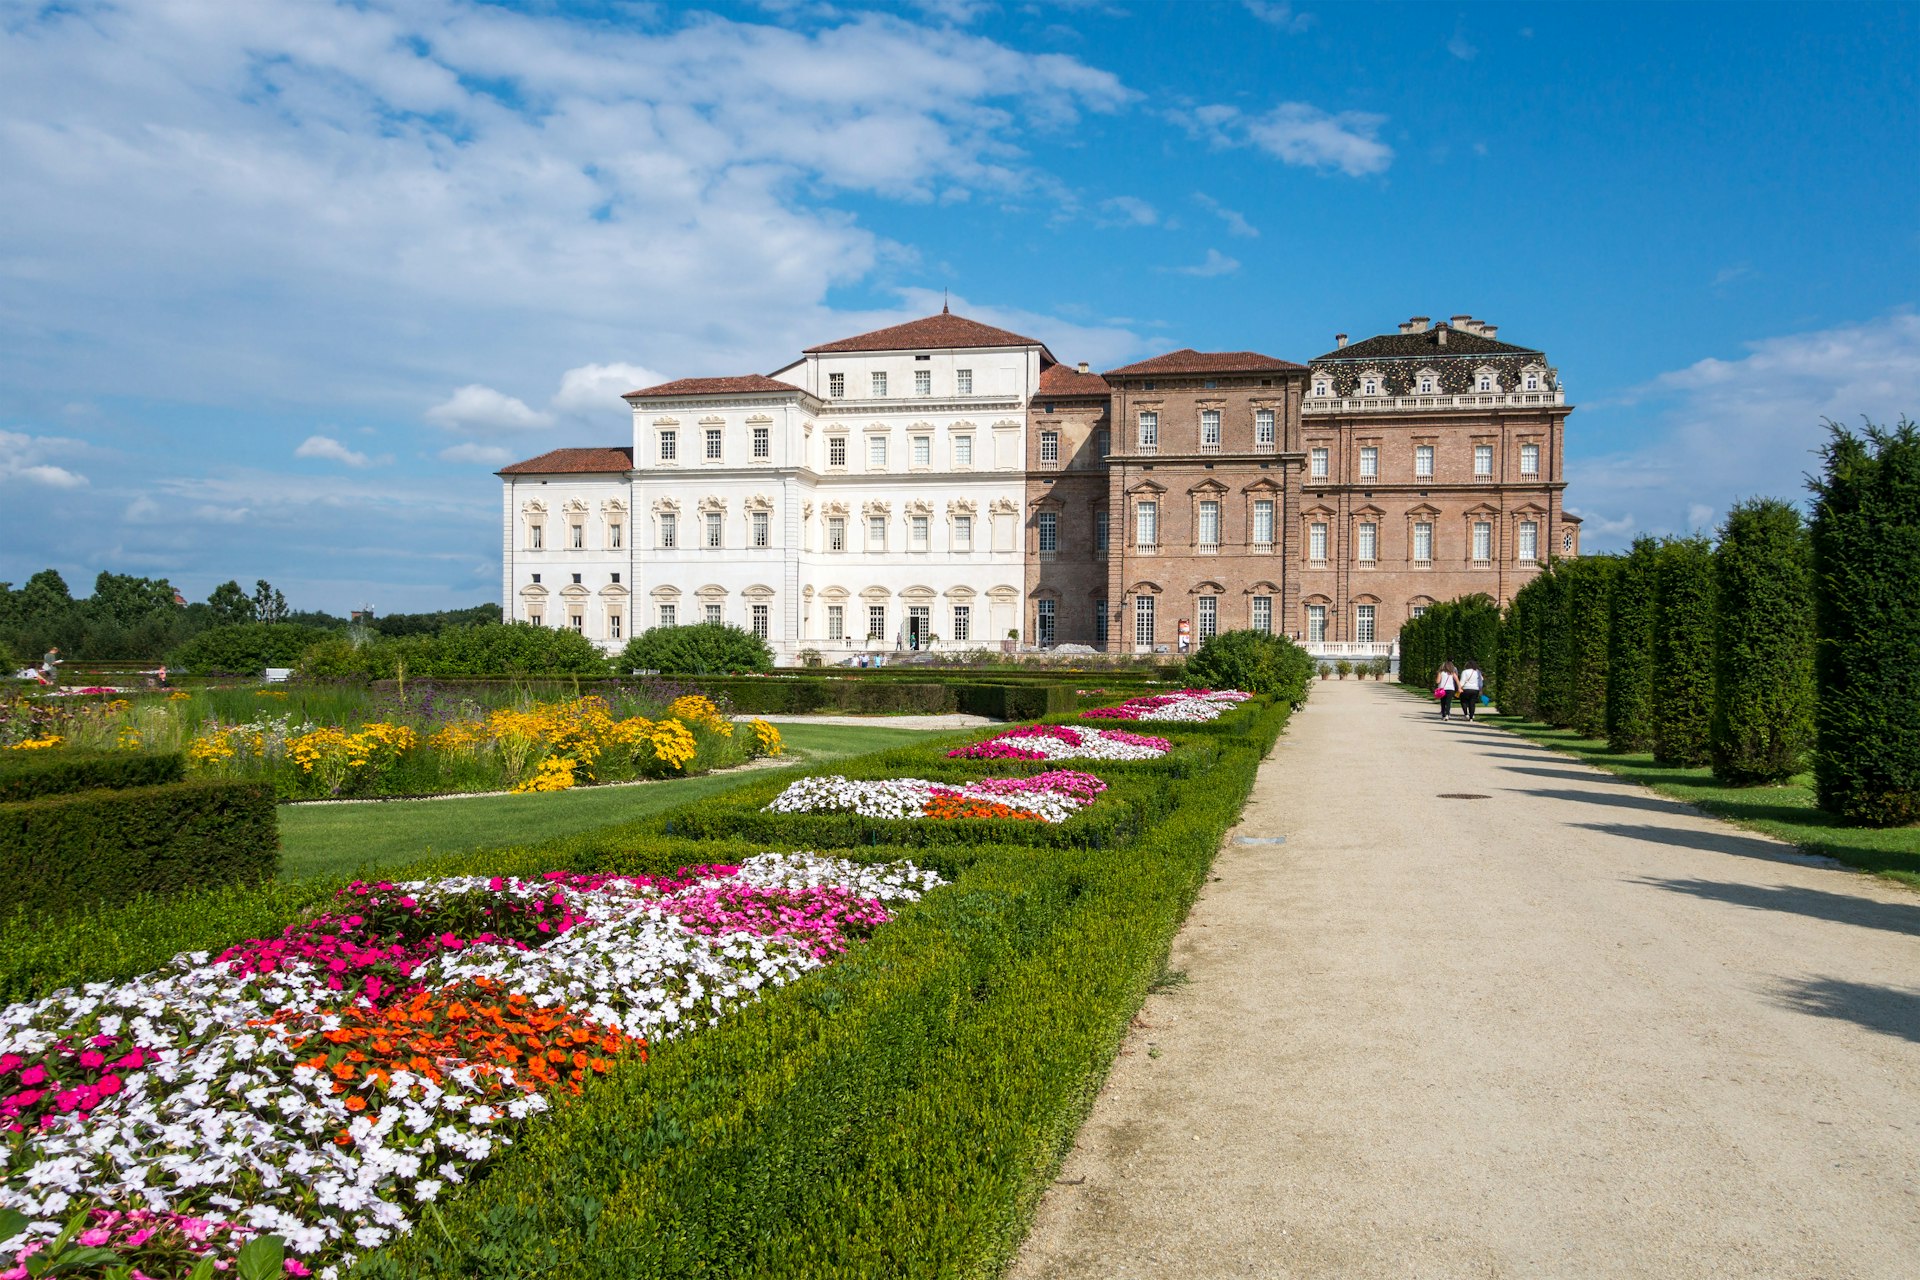 Gardens of the Palace of Venaria, the residence of the Royal House of Savoy